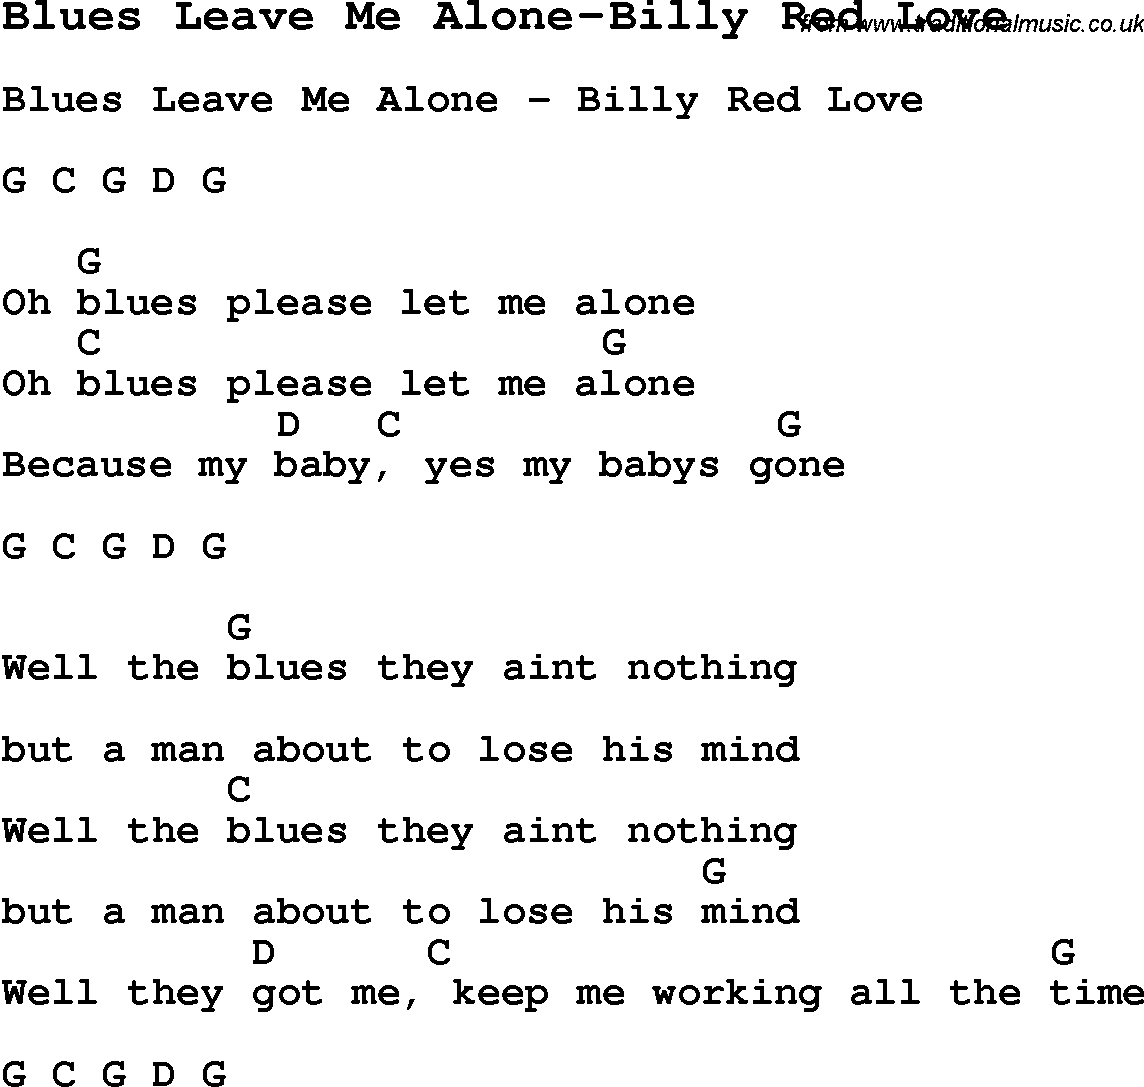 Blues Guitar Song, lyrics, chords, tablature, playing hints for Blues Leave Me Alone-Billy Red Love